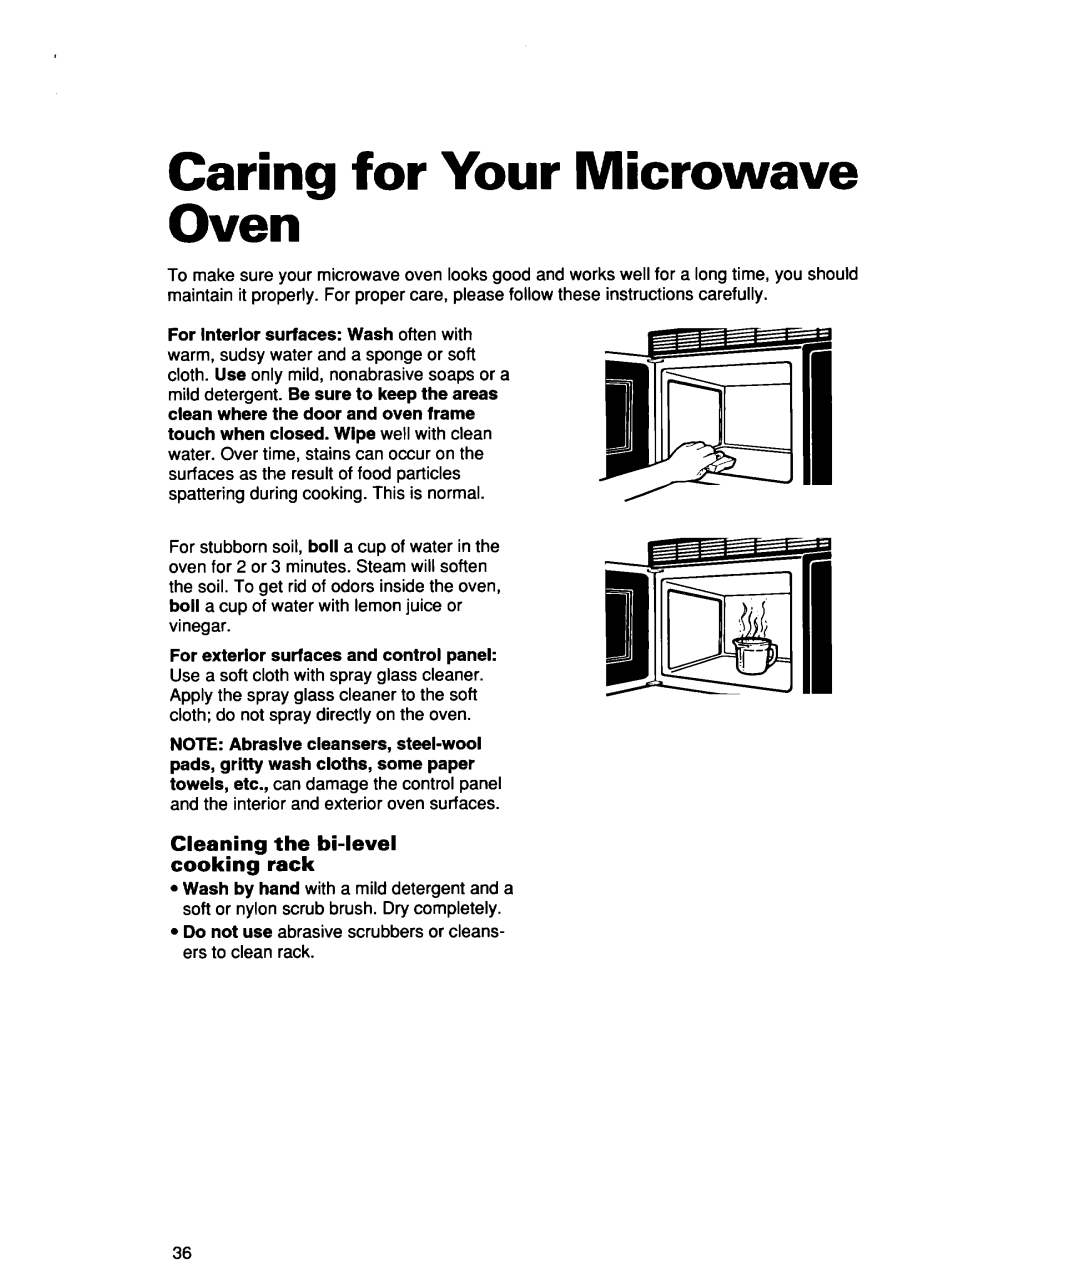 Whirlpool lREB/Q warranty Caring for Your Microwave Oven, Cleaning the bi-levelcooking rack 